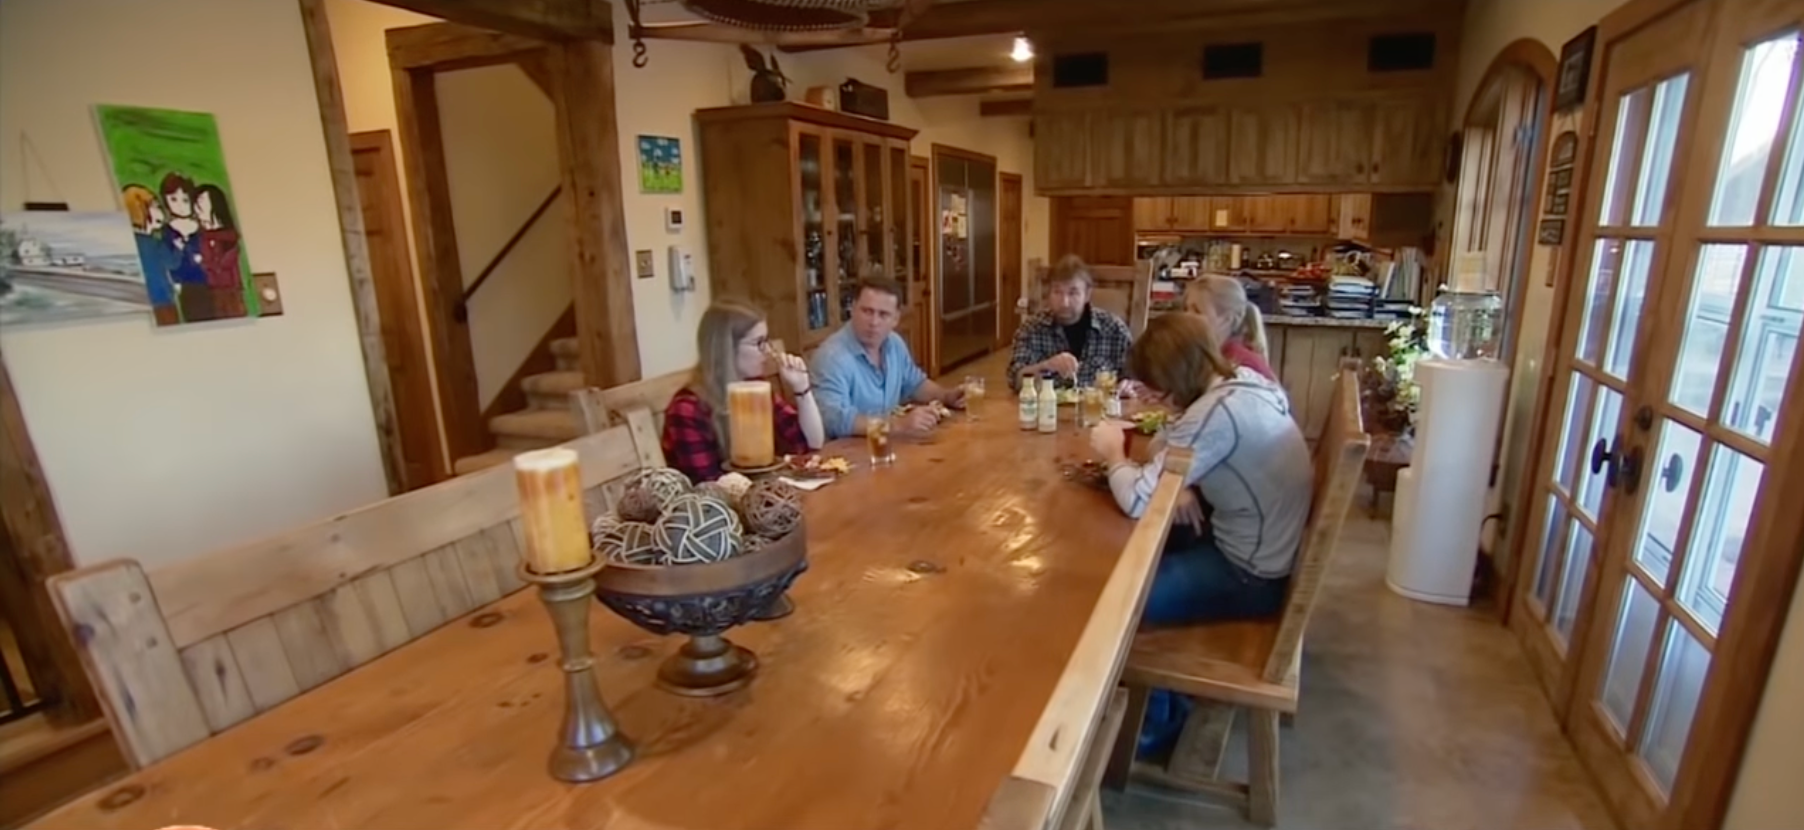 Karl sits down at the dinner table with the Norris family at their 4-bedroom ranch in Texas. | Source: YouTube.com/TODAY